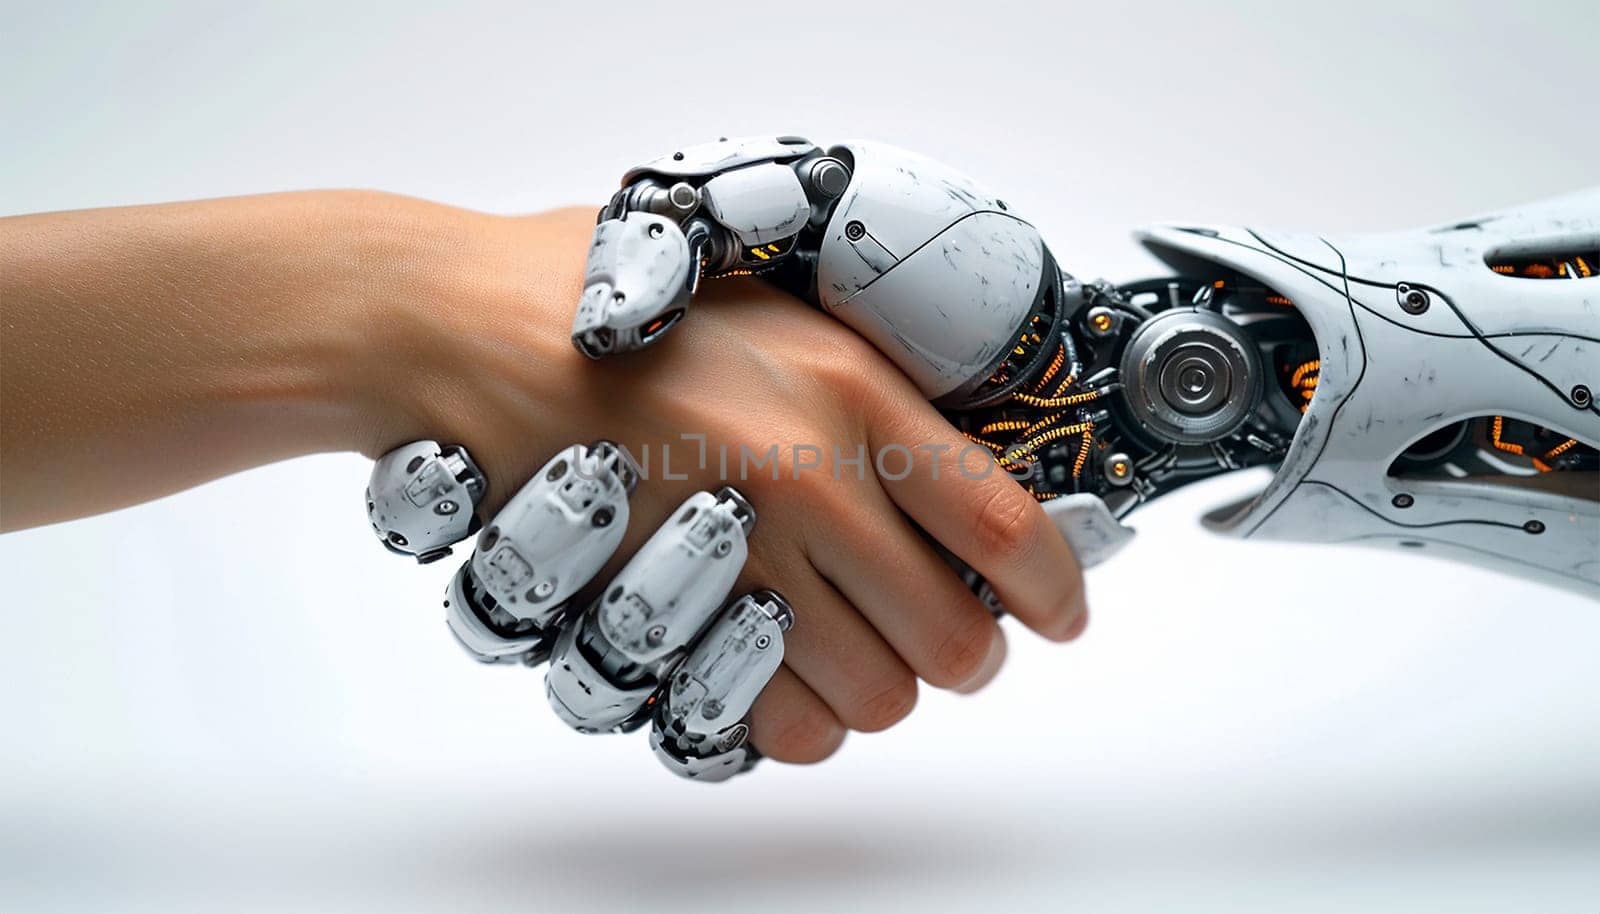 Robot shaking human hand. Cyber communication design concept. Female robot and human holding hands with handshake. Digital robot handshake futuristic digital age robot science digital technology white background by Annebel146